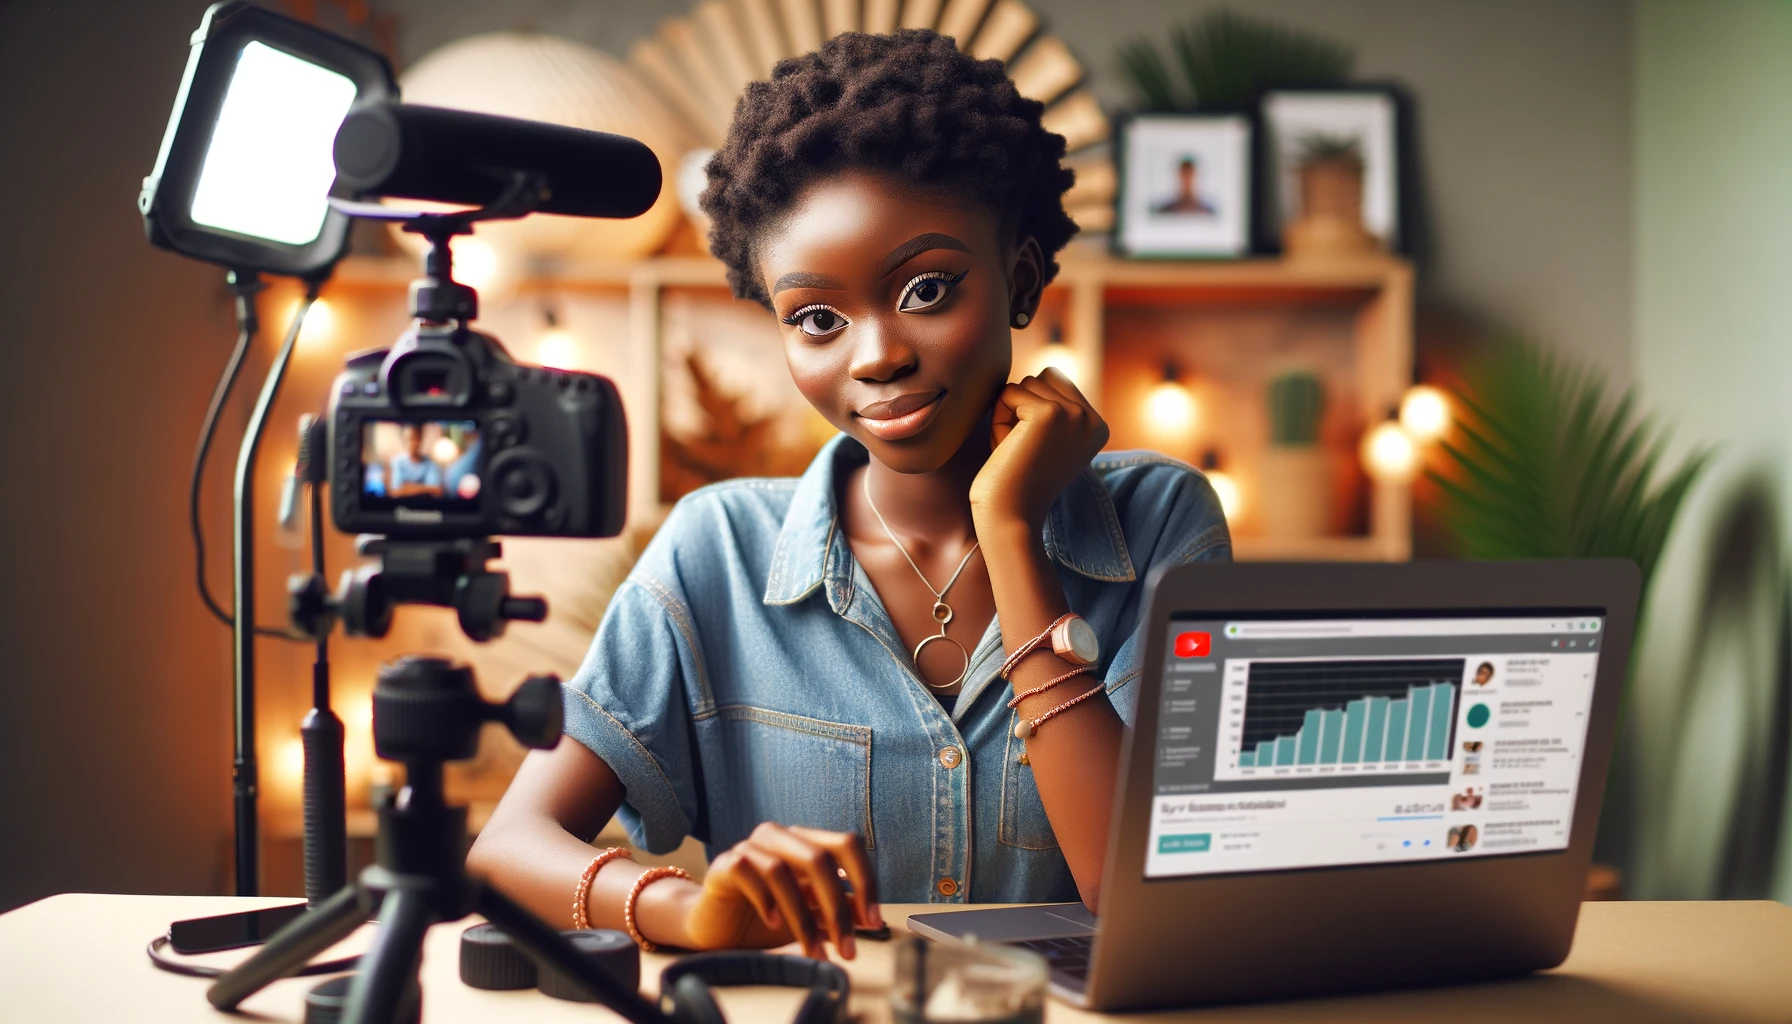 A Nigerian student creating content on YouTube, monetizing their passion